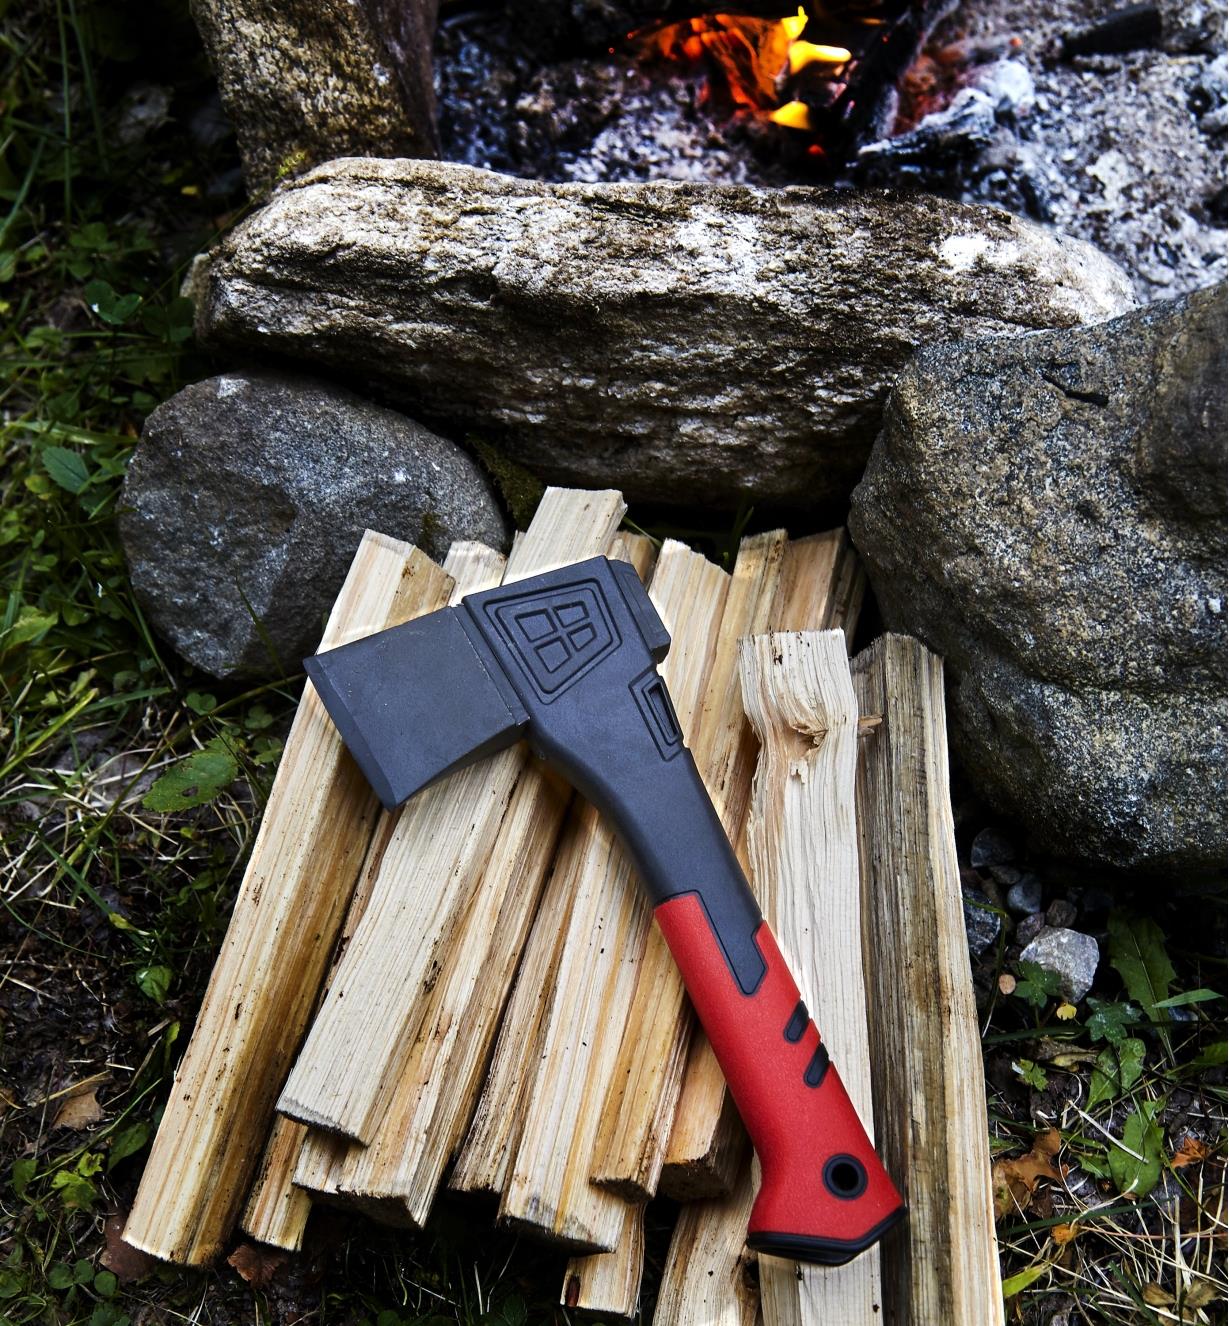 The hatchet lying on a pile of kindling beside a campfire